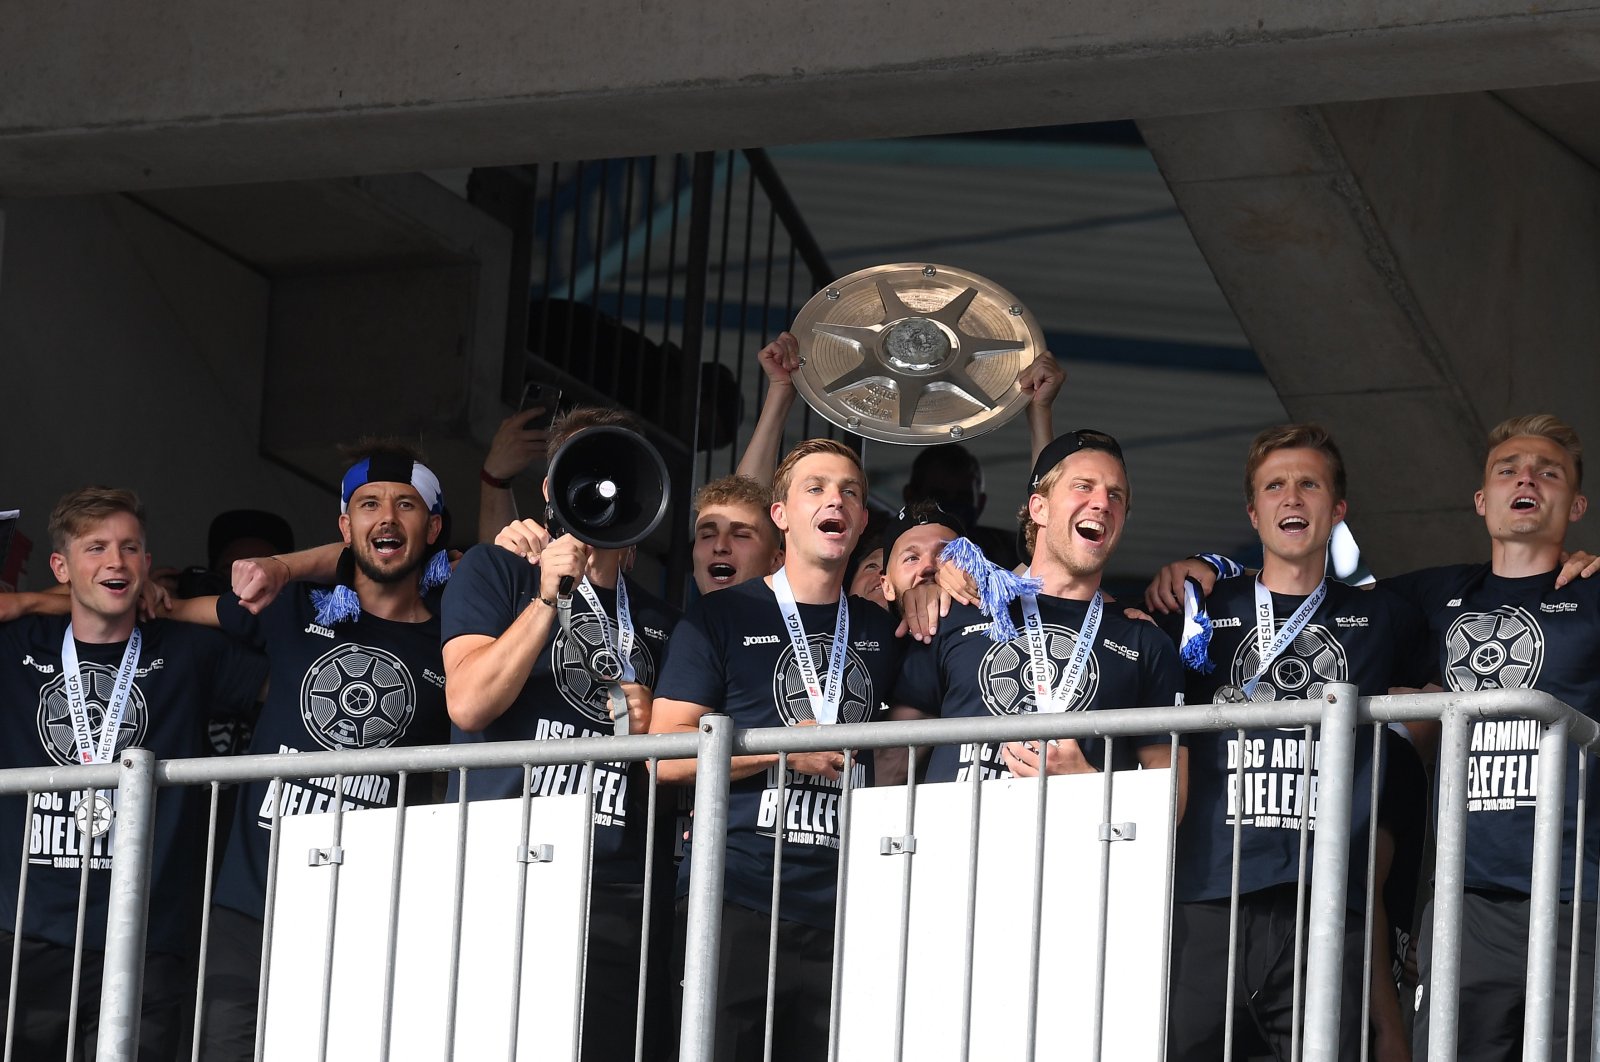 Players of Bielefeld celebrate with the championship trophy after the German Bundesliga Second Division match between DSC Arminia Bielefeld and FC Heidenheim 1846 in Bielefeld, Germany, June 28, 2020. (EPA Photo)